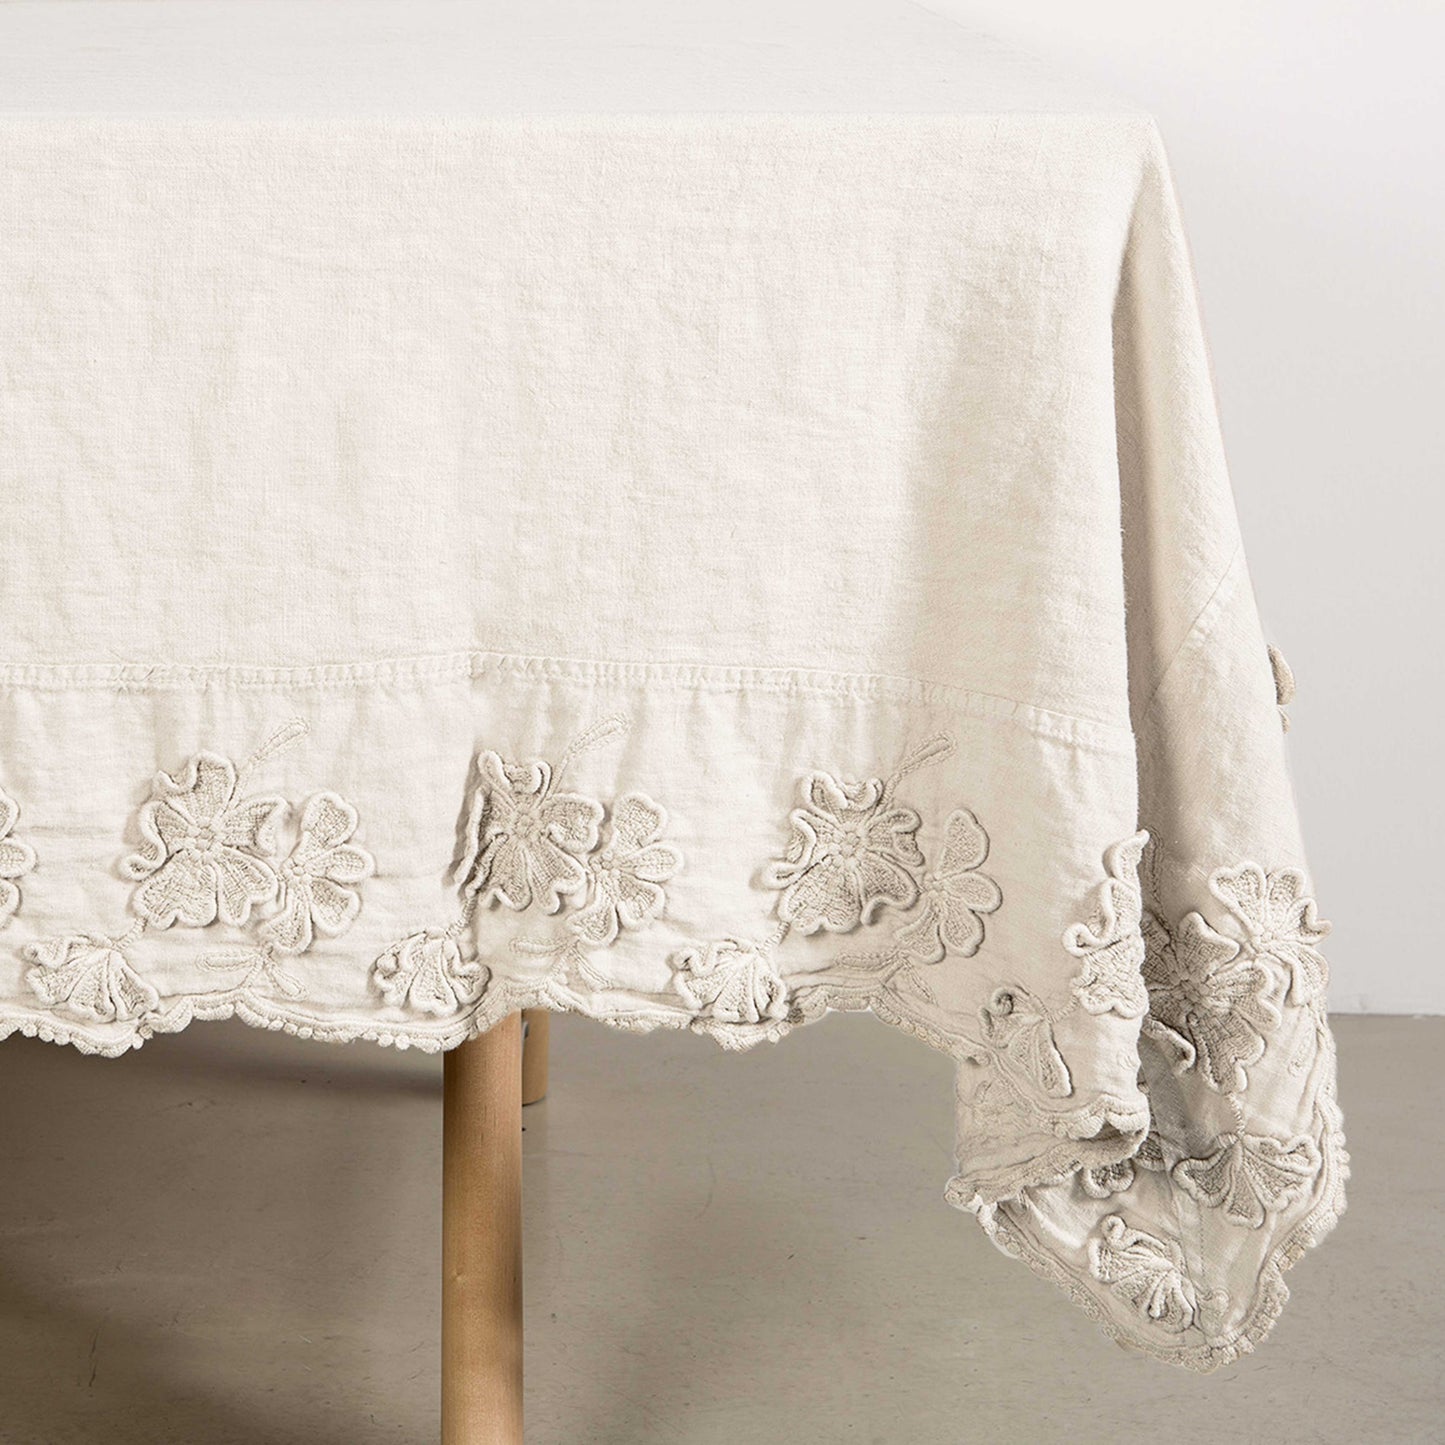 Tablecloth with Petals embroidery